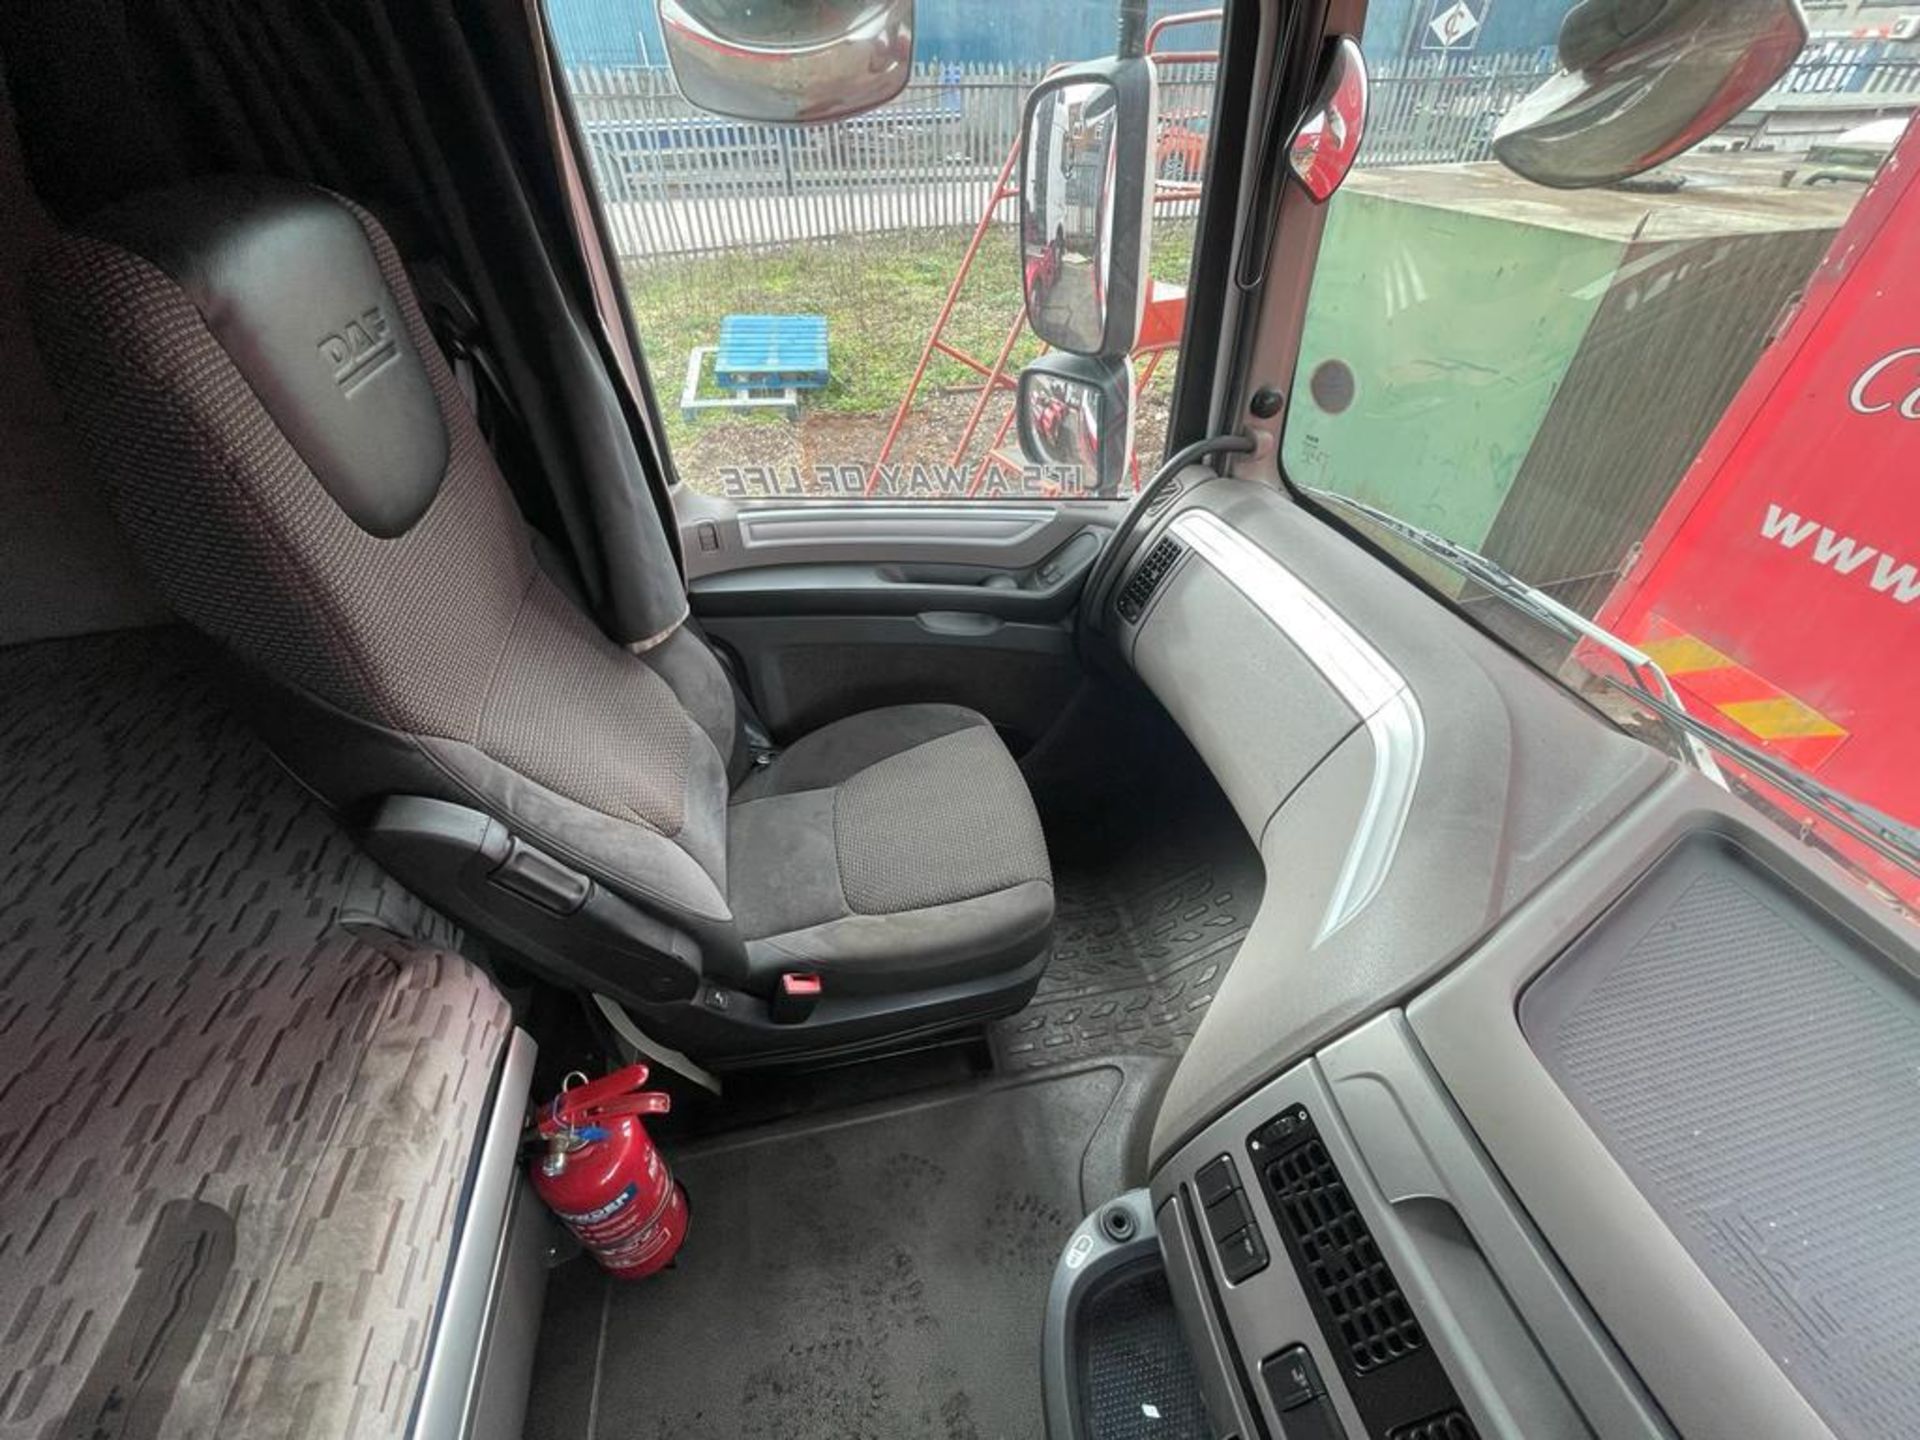 2015 DAF XF 510 FTG TRACTOR UNIT - FULL DAF INFOTAINMENT SYSTEM - 794011 KMS - Image 7 of 11